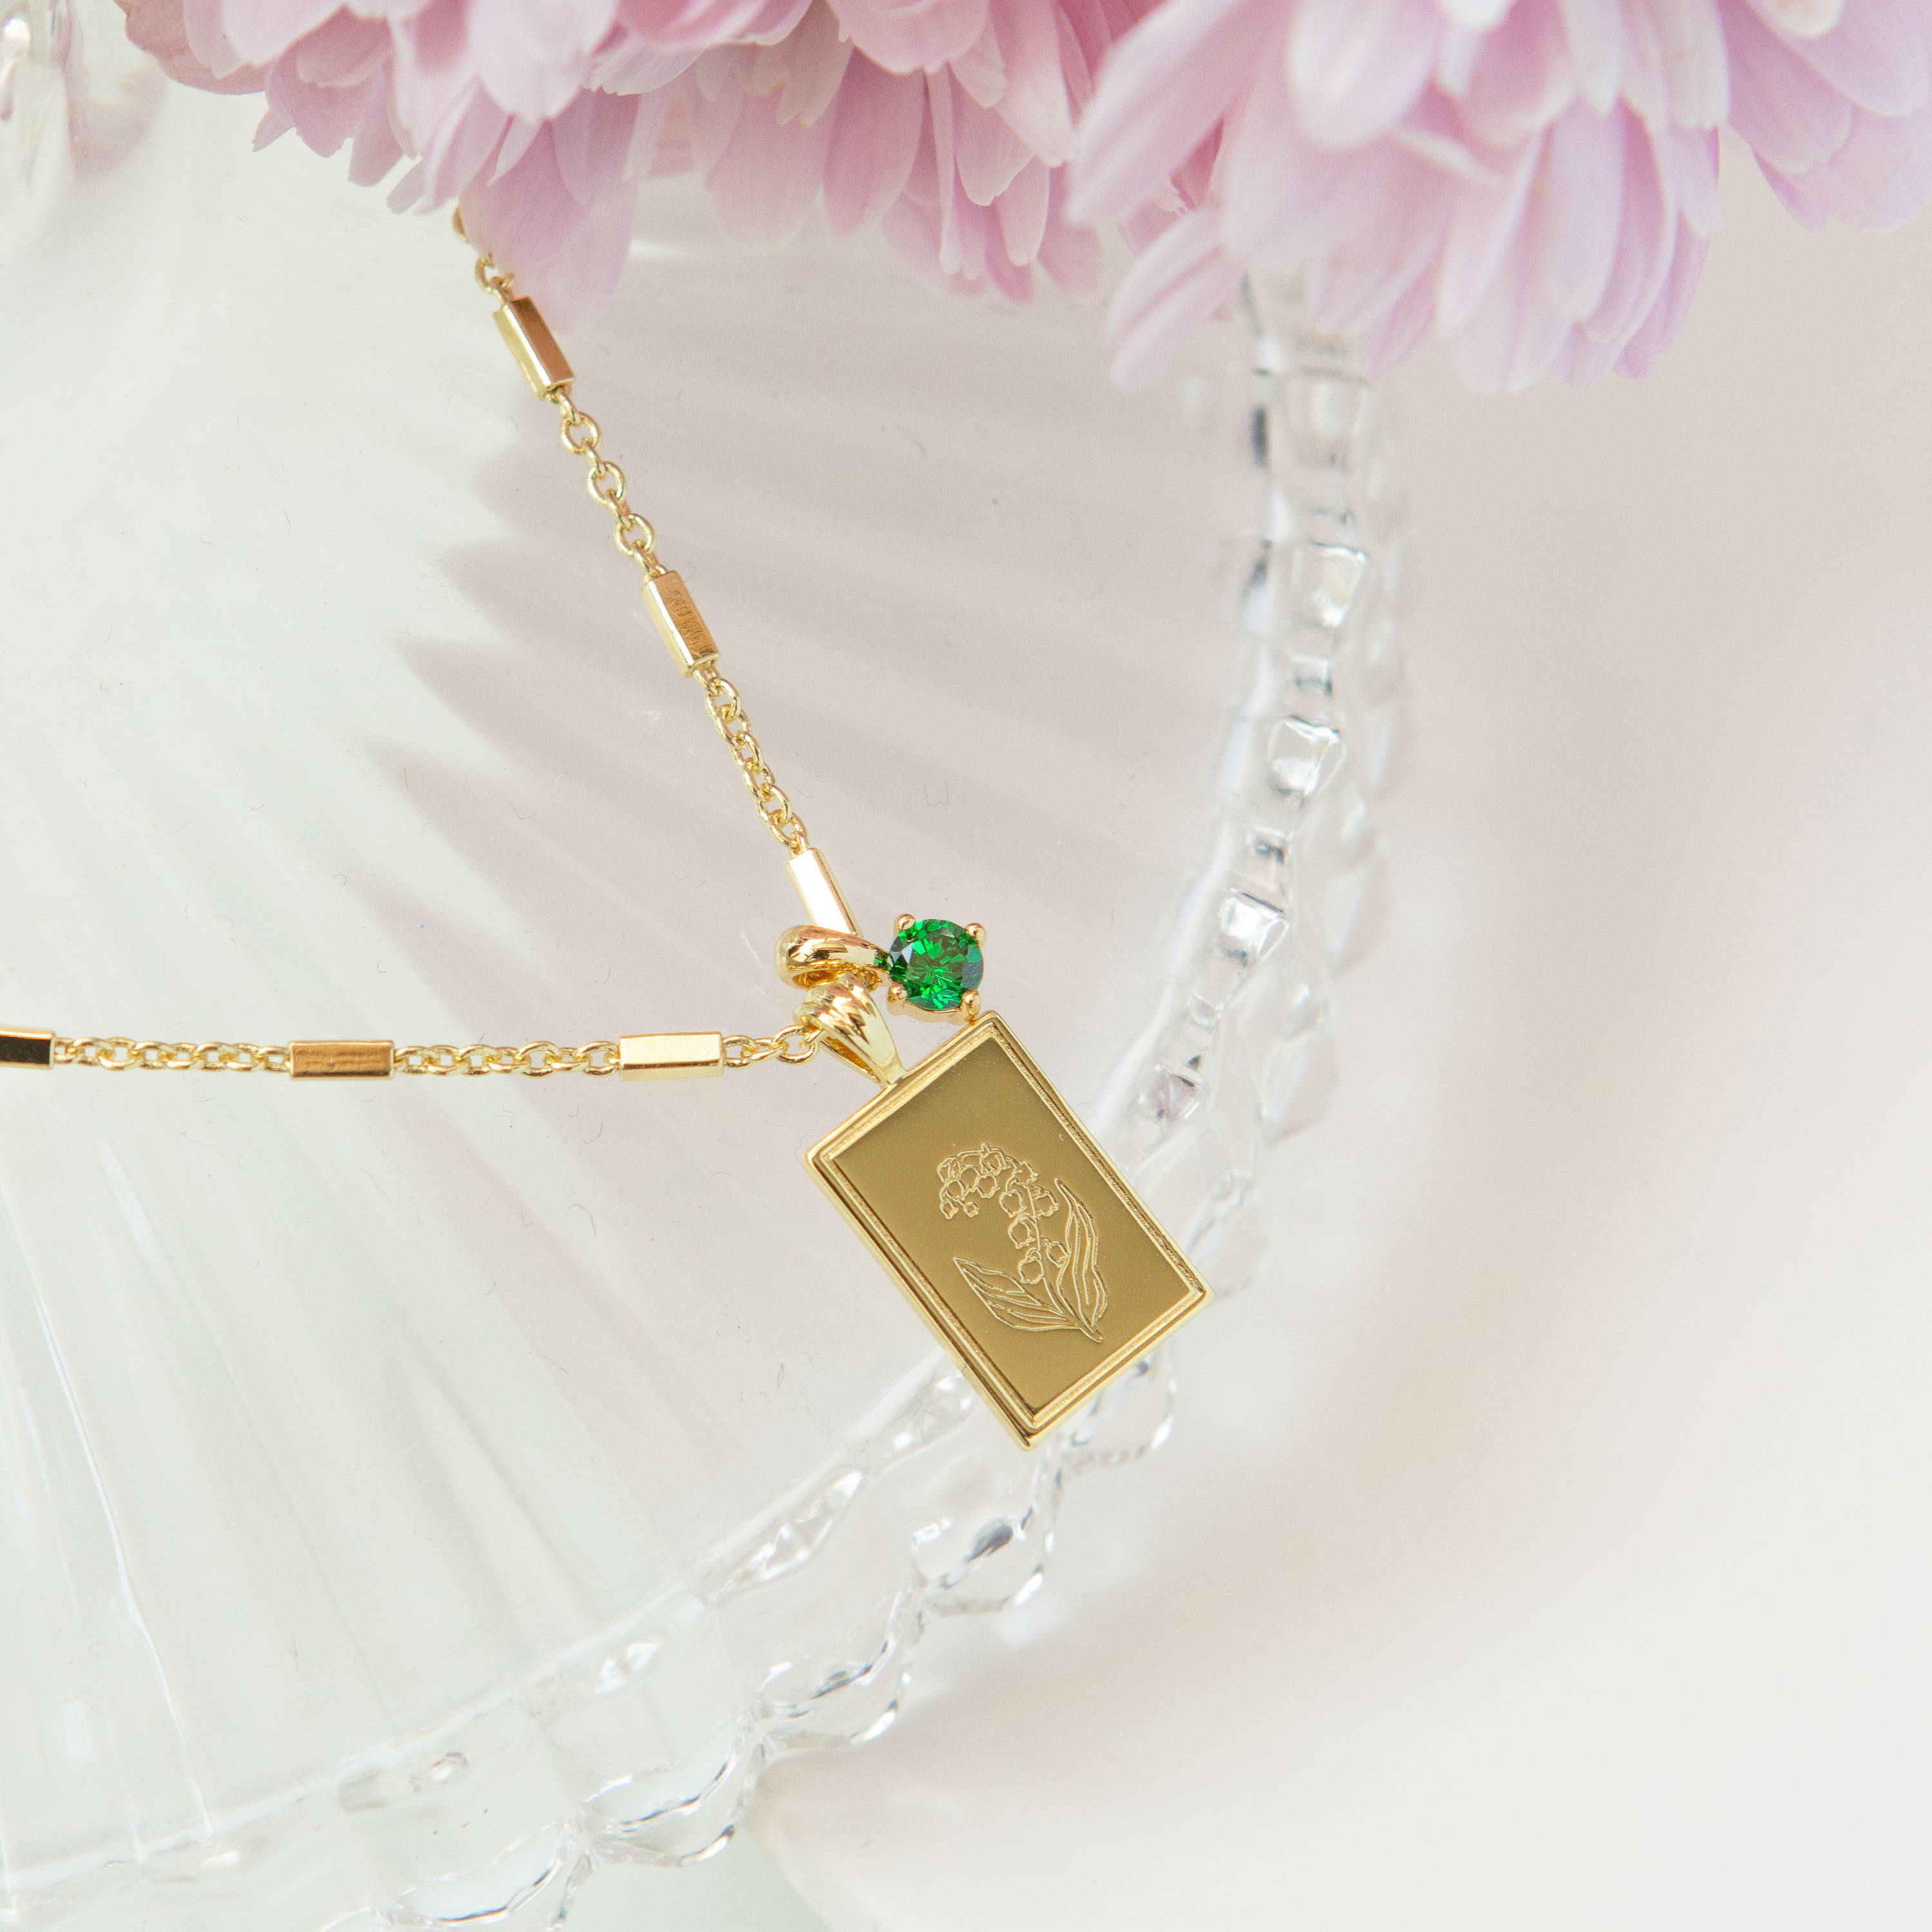 14k Gold Filled Birth Flower Pendant and Birthstone Charm Necklace hanging on a Tara Chain